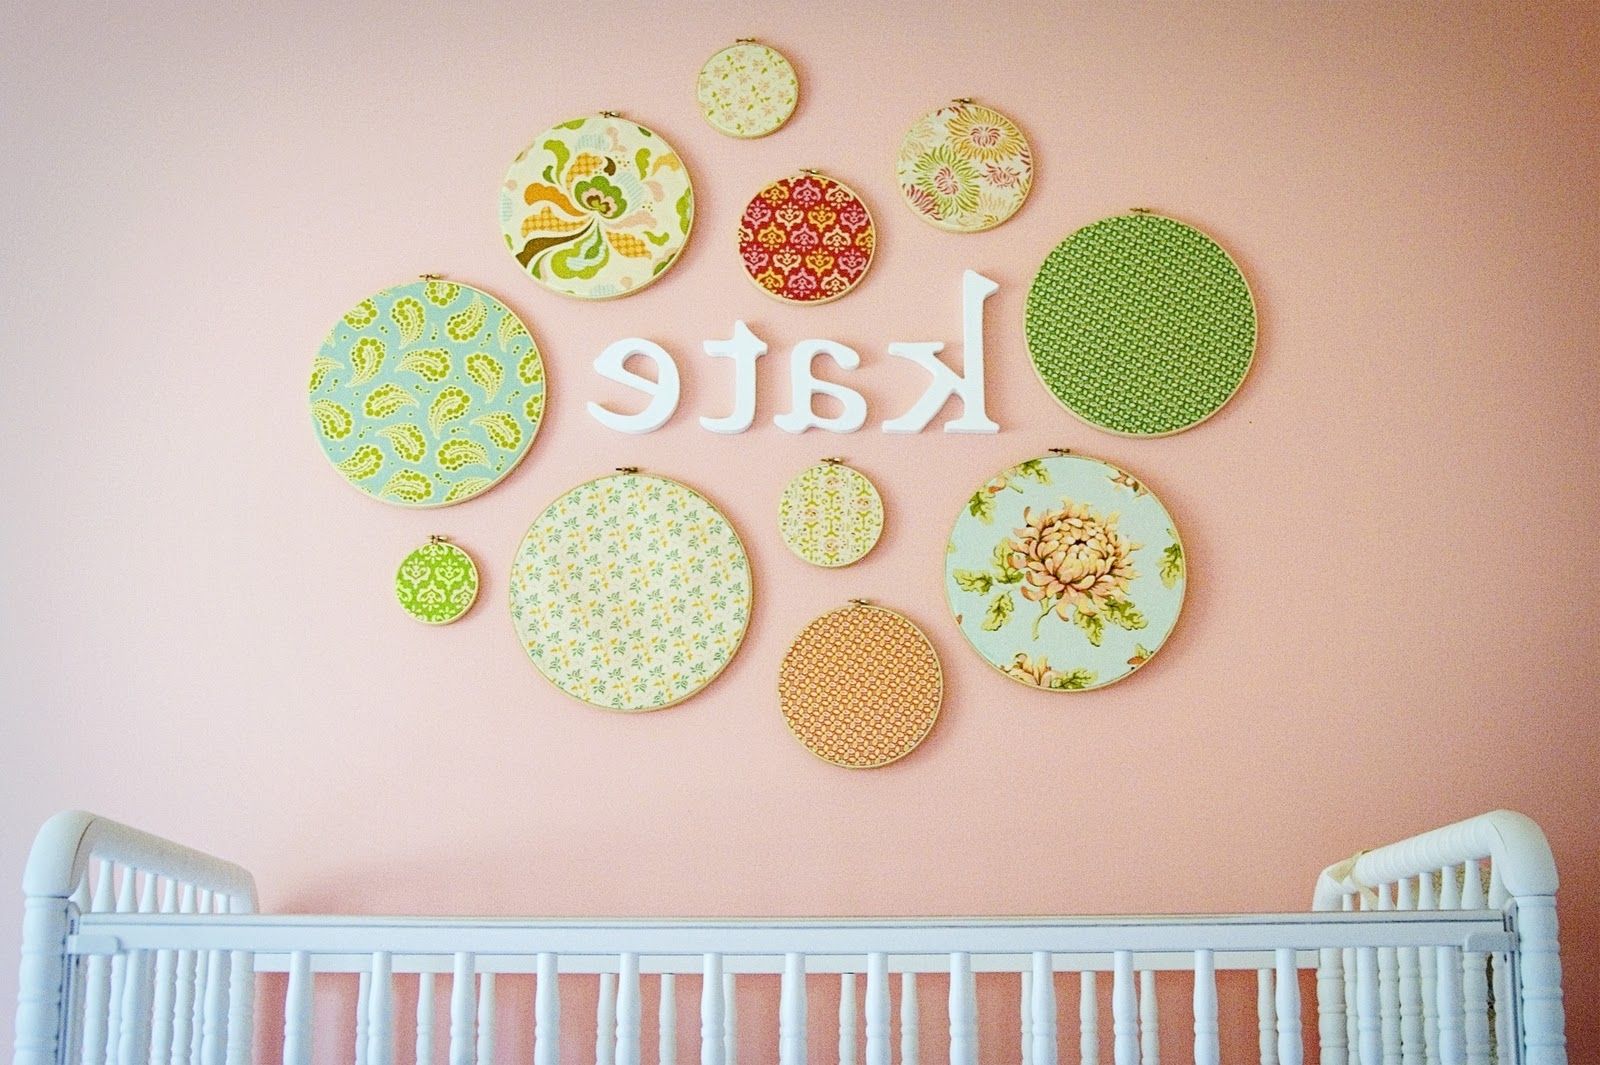 Latest Nursery Wall Accents Intended For What's All The Hoopla About? – Project Nursery (View 4 of 15)